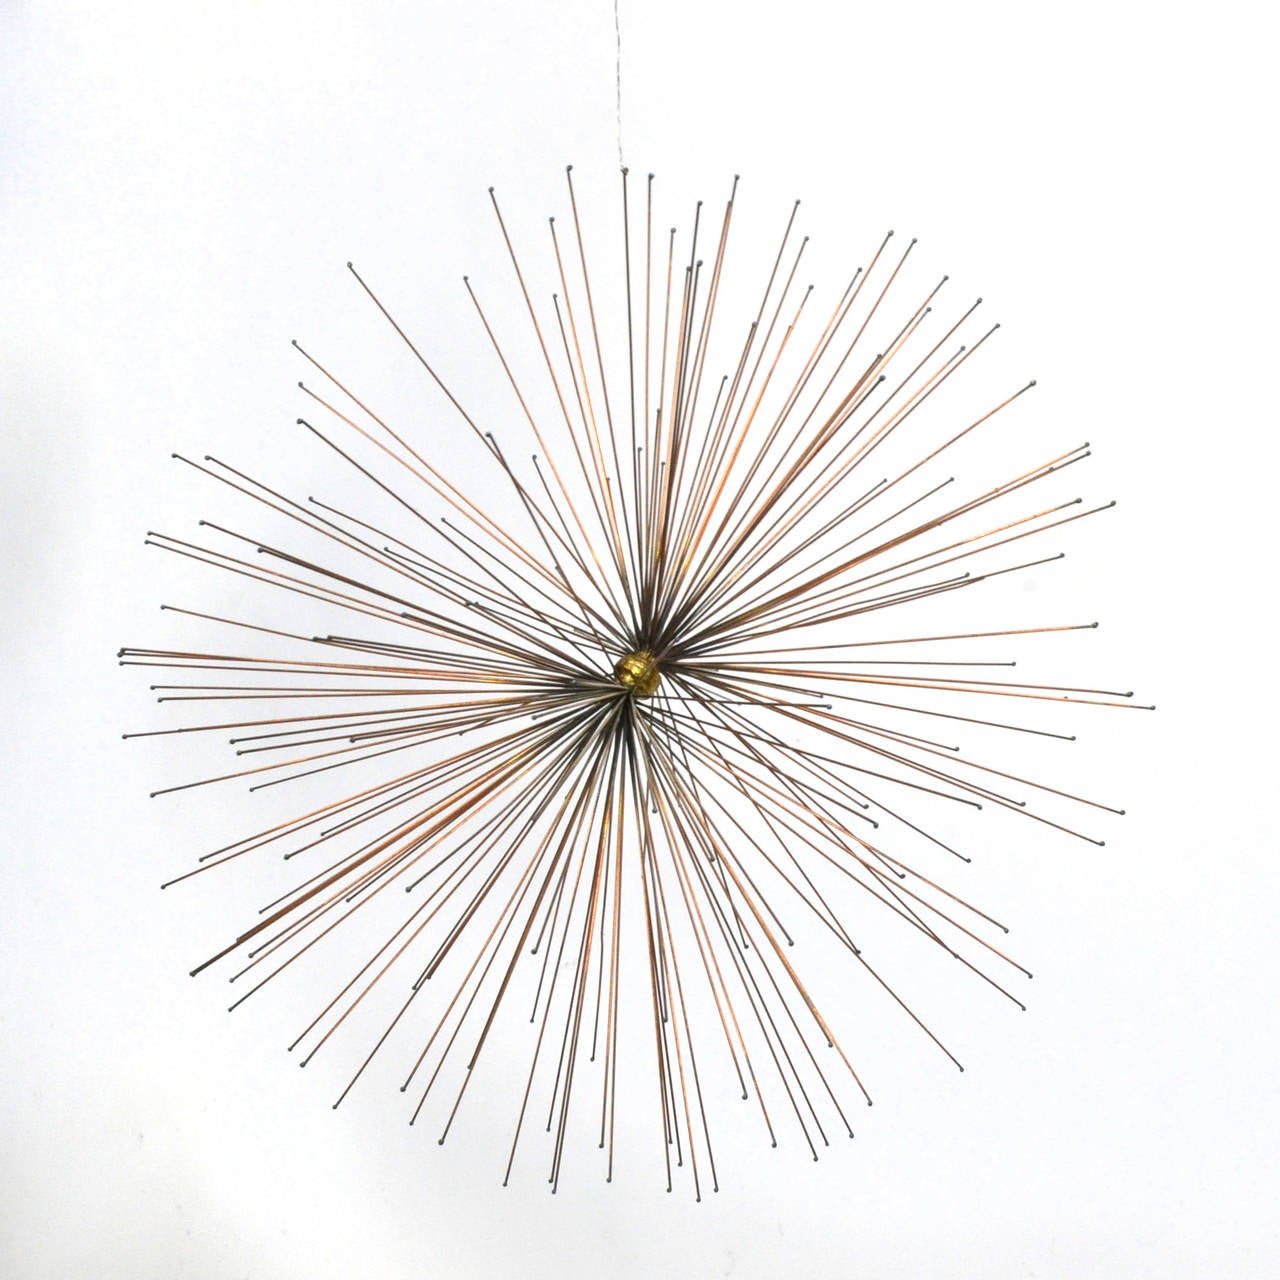 This beautiful sculpture by Thomas Hibben is a starburst form designed to hang from above like a mobile activating space near the ceiling seldom utilized. The bronze rods all have a small detail on the tips and gather in the center in a welded mass